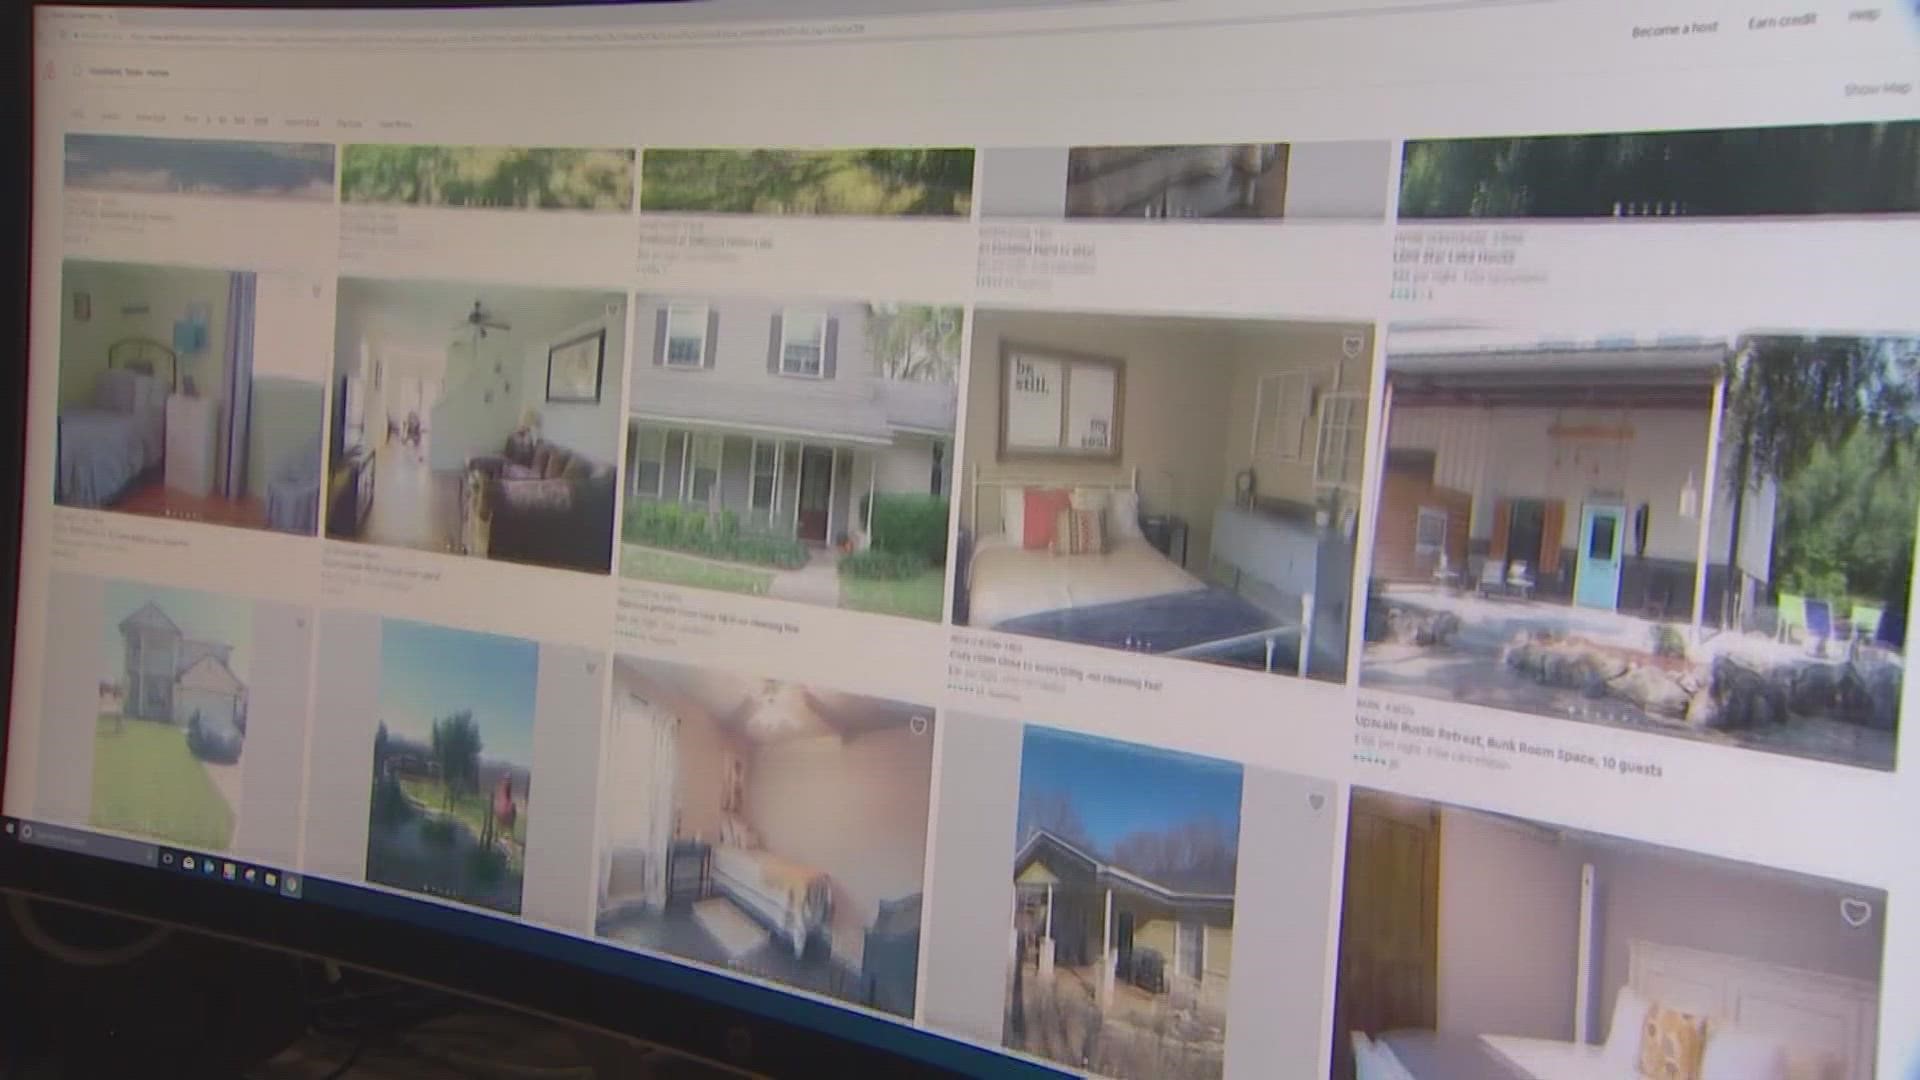 There have been some high-profile violent crimes at Airbnb locations, including a deadly shootout at a graduation party in Houston earlier this month.